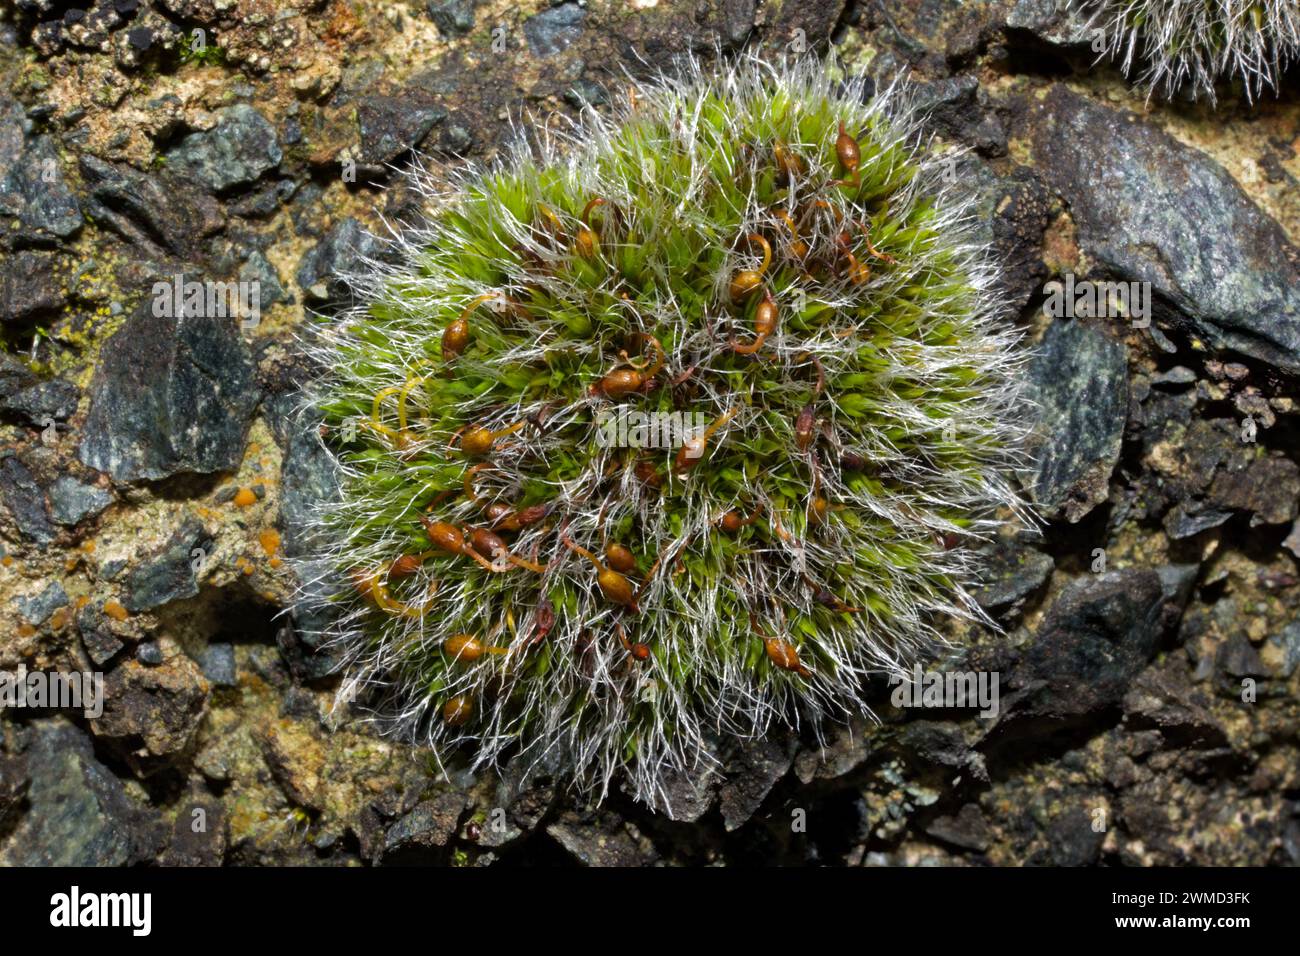 Grimmia pulvinata is a moss that grows on rocks, walls, concrete and tree trunks, and occurs in temperate climates worldwide. Stock Photo